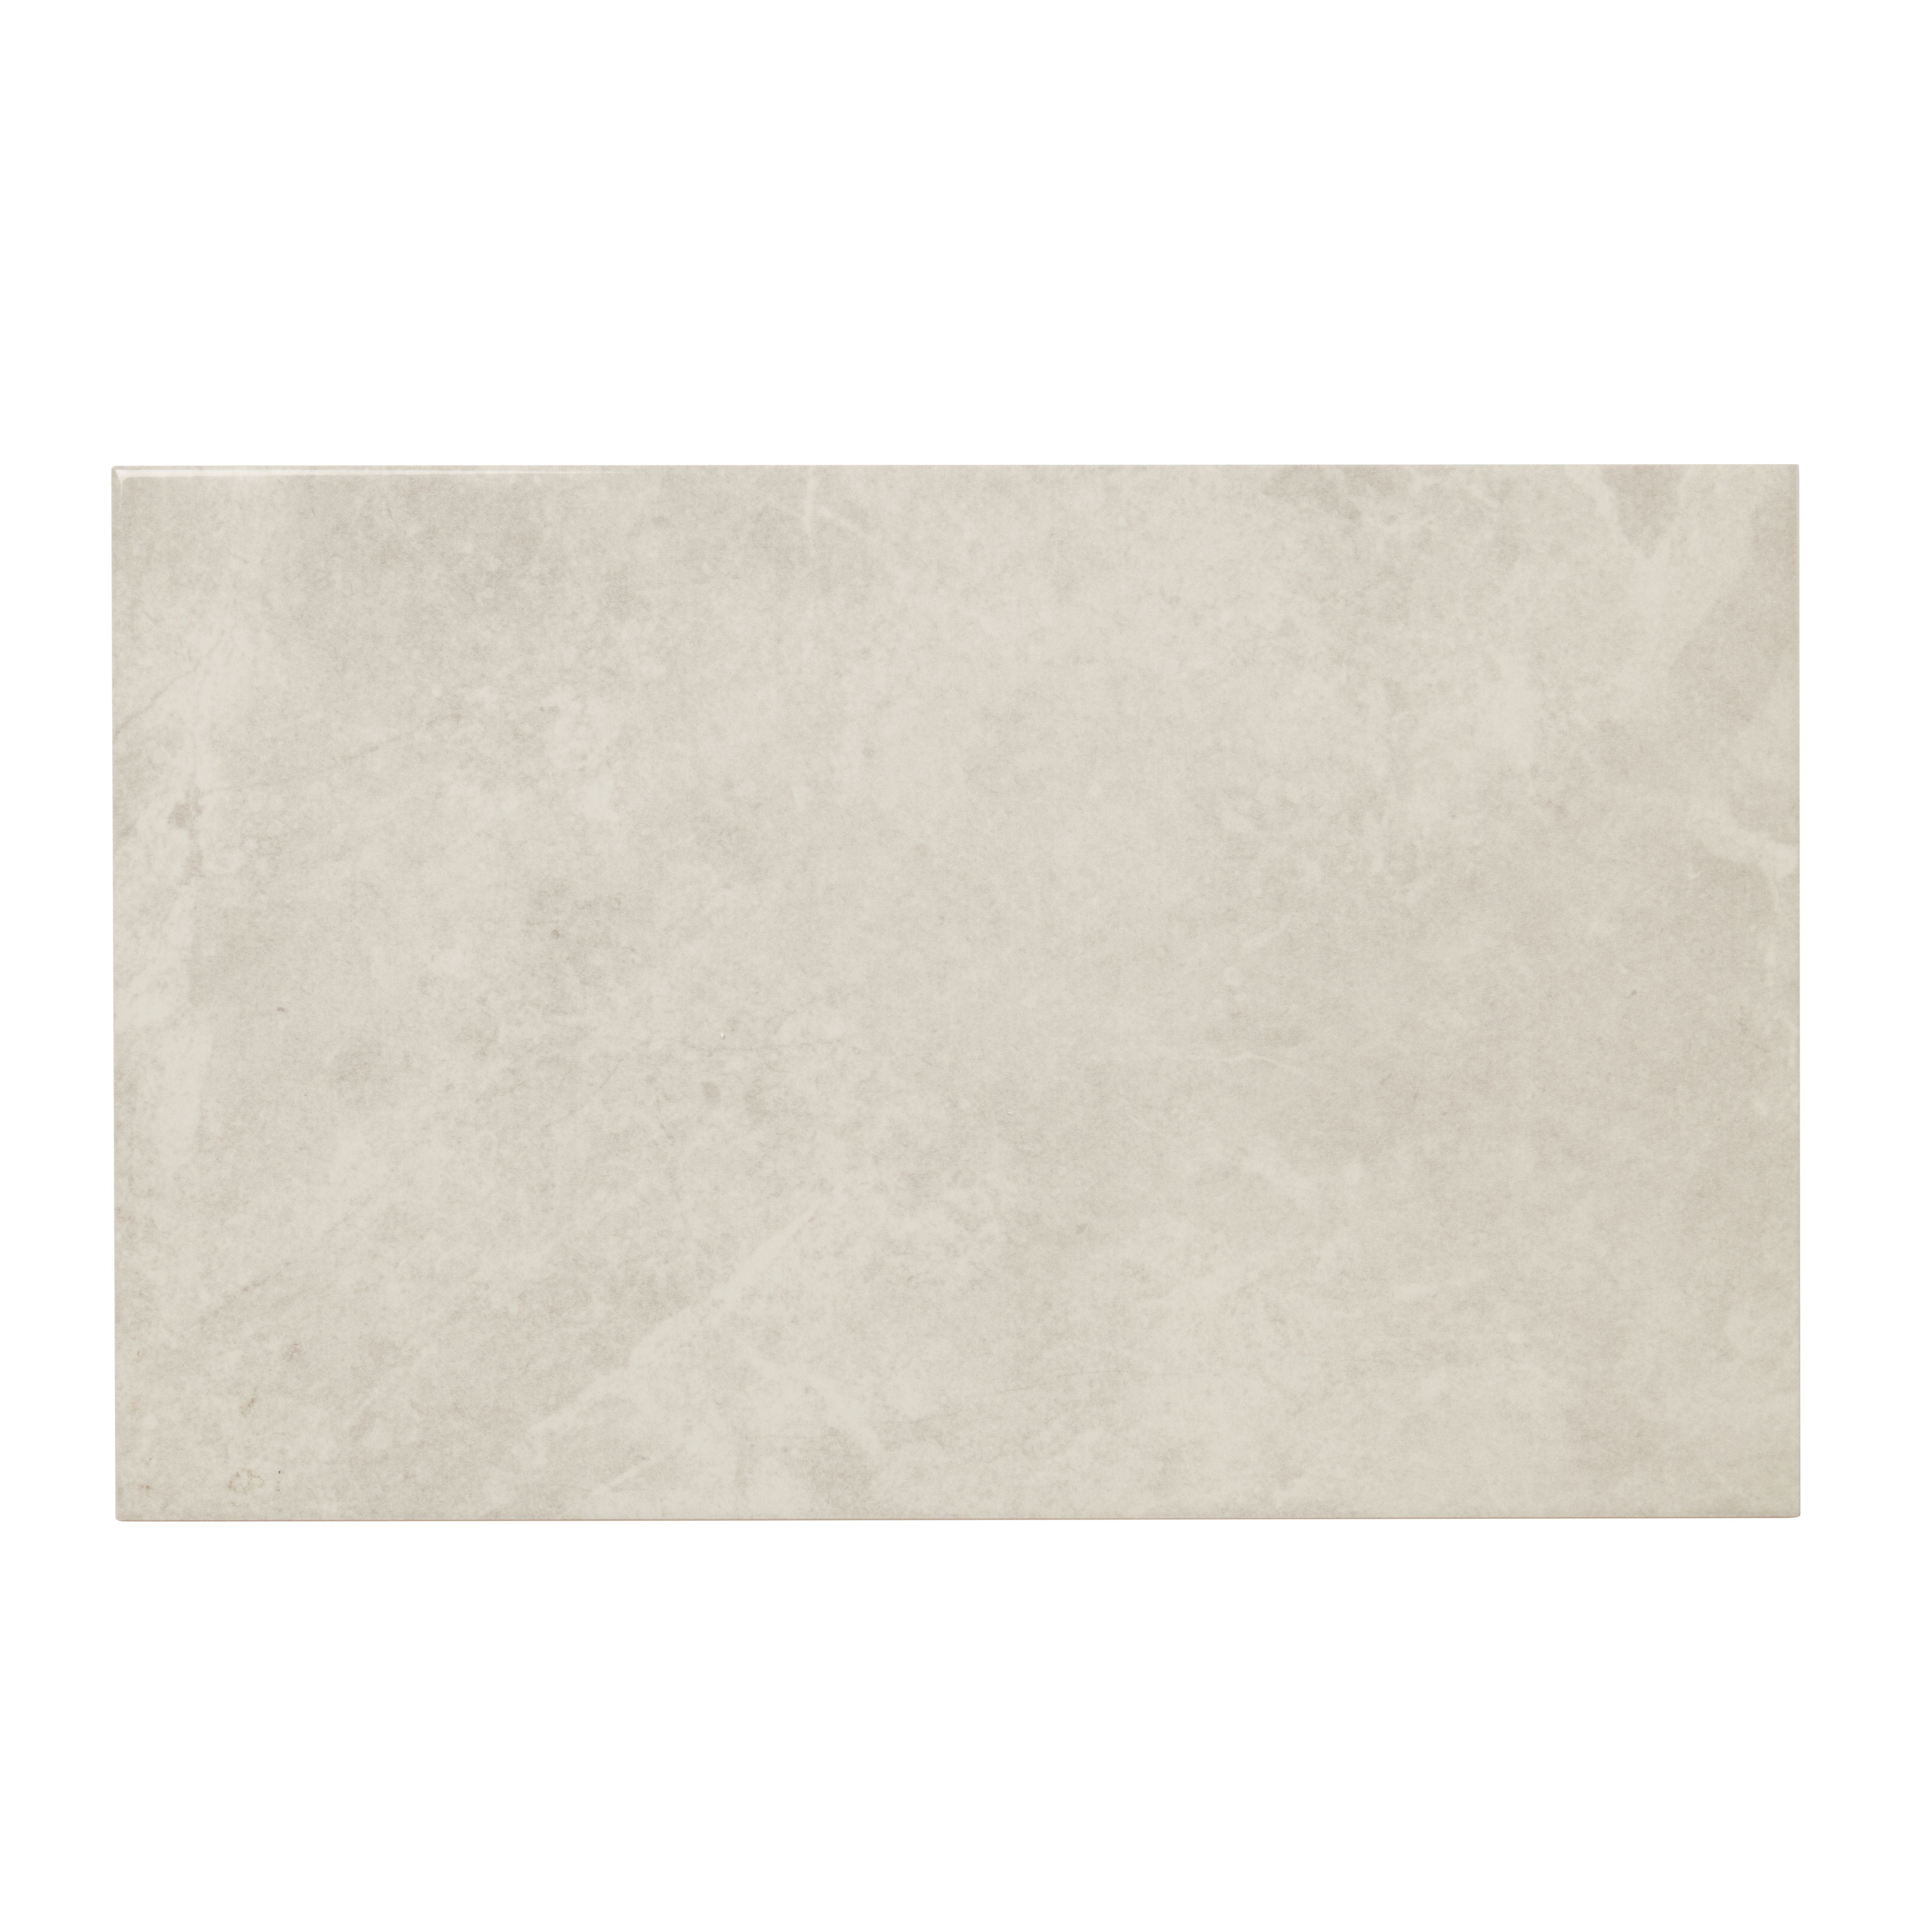 Minerva Silver Gloss Marble effect Ceramic Wall Tile, Pack of 10, (L)400mm (W)250mm